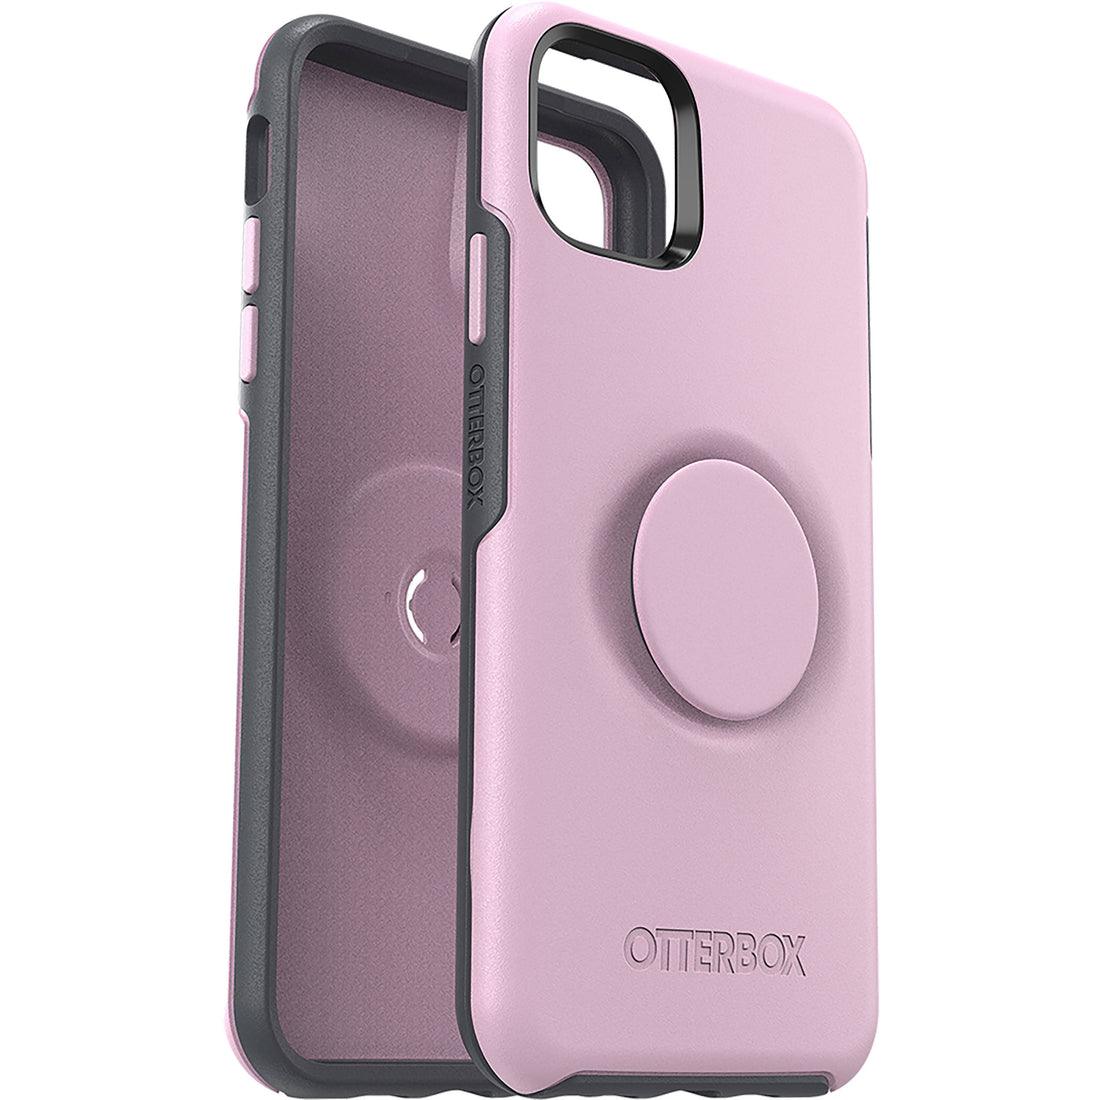 OtterBox + POP Case for Apple iPhone 11 Pro Max - Mauveolous (Certified Refurbished)